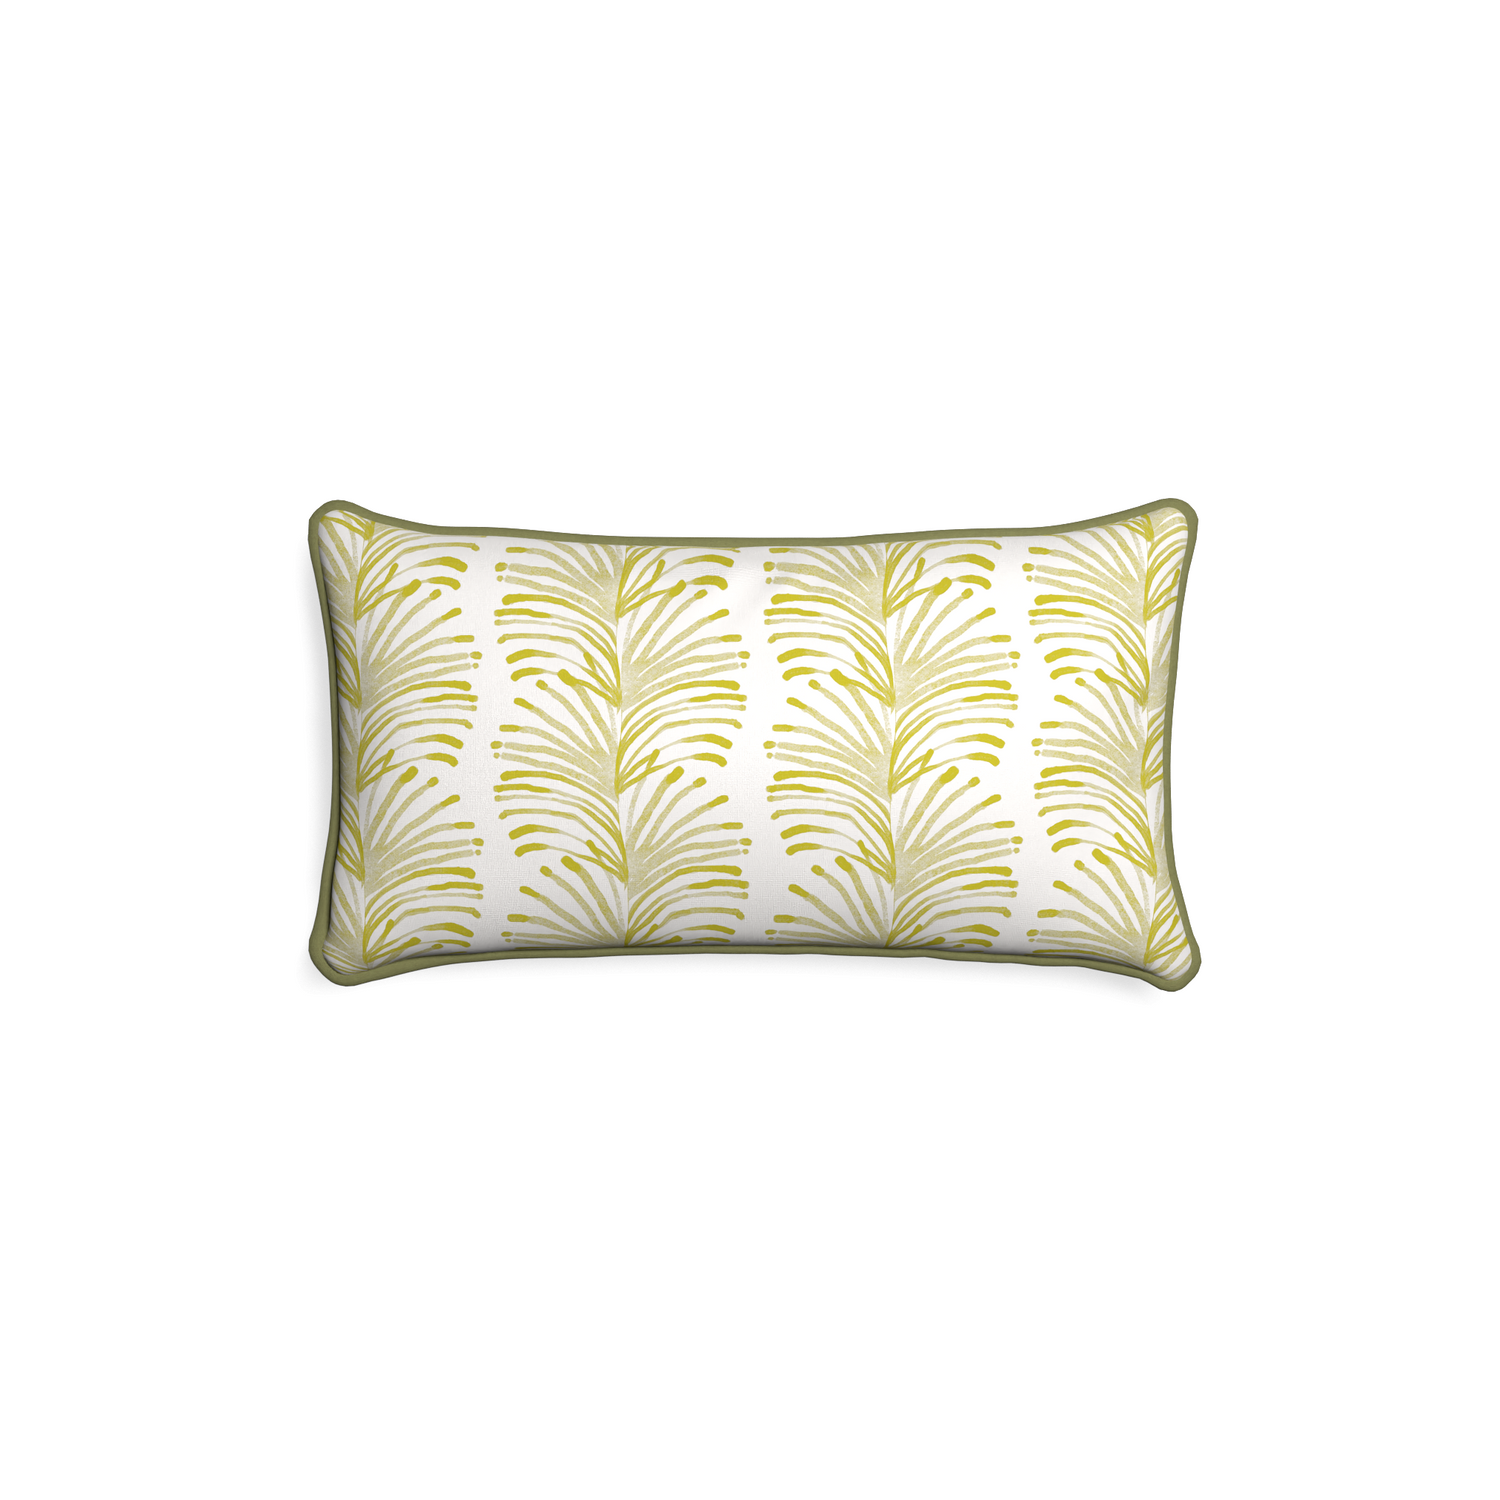 Petite-lumbar emma chartreuse custom yellow stripe chartreusepillow with moss piping on white background